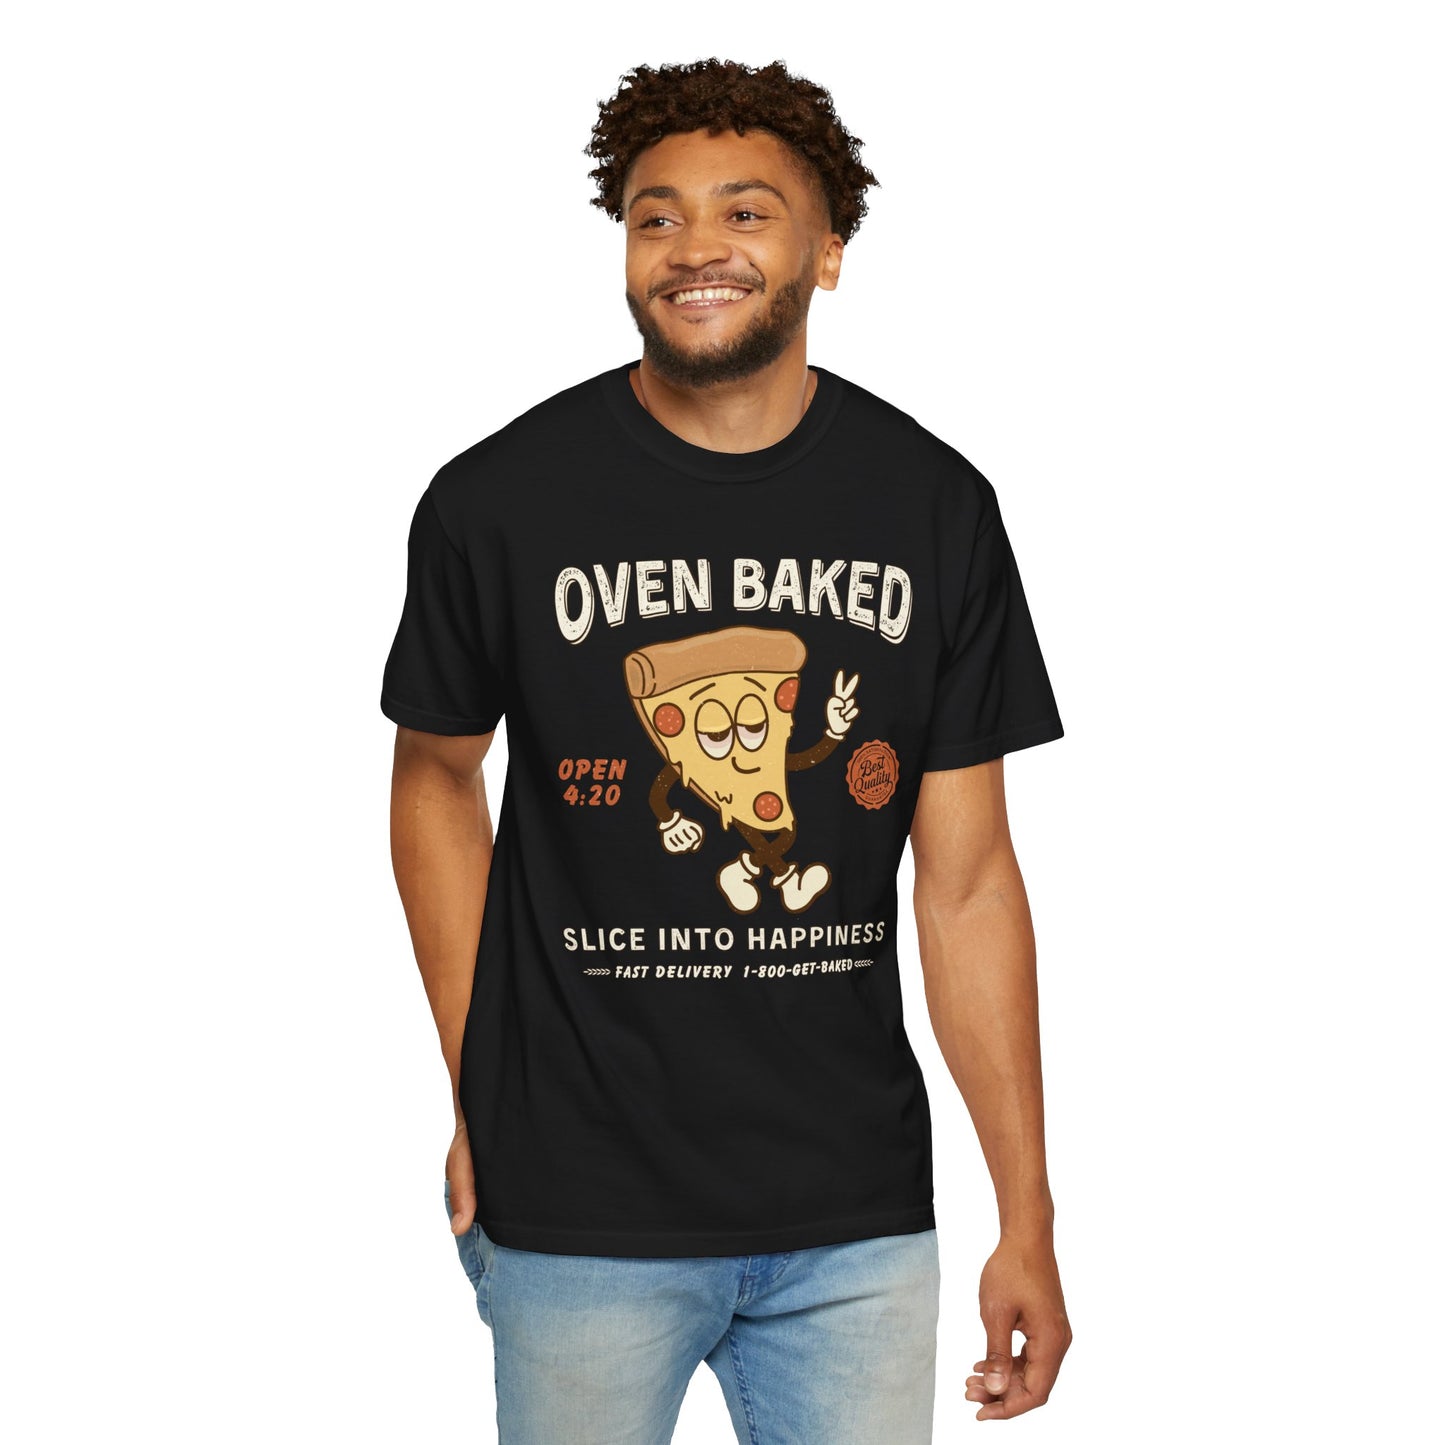 Oven Baked 420 Pizza Tee